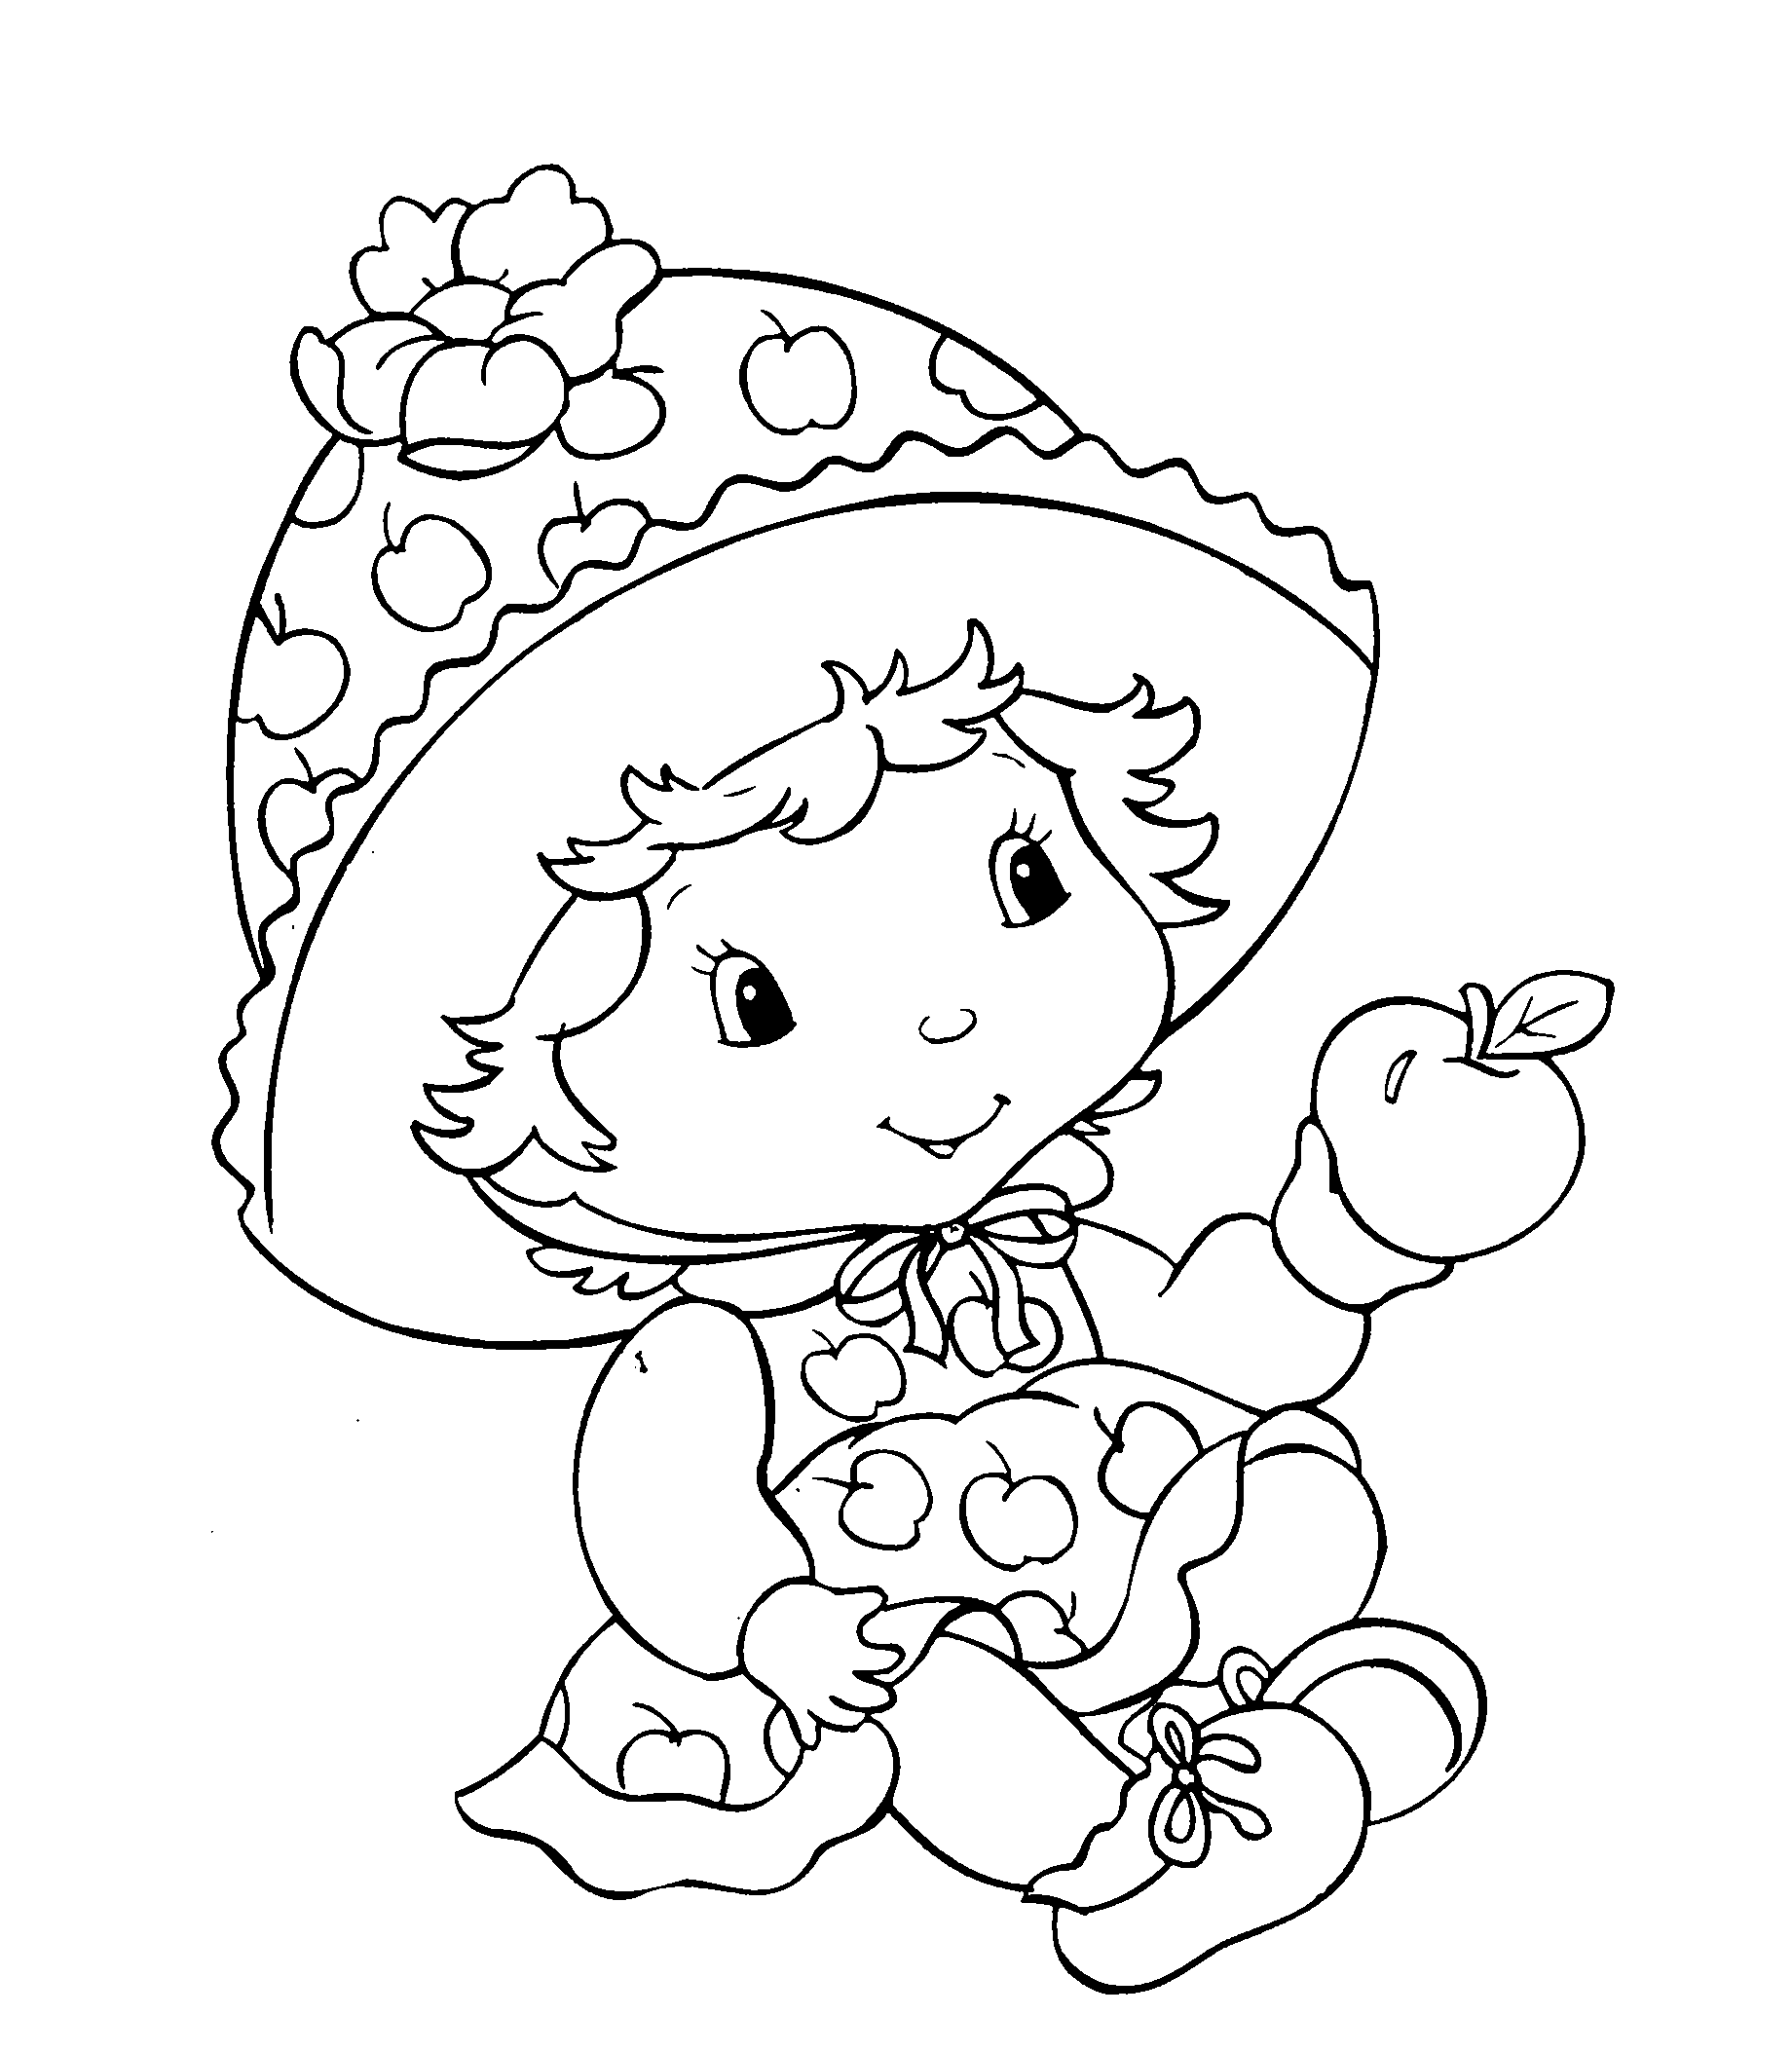 Baby Charlotte to color!